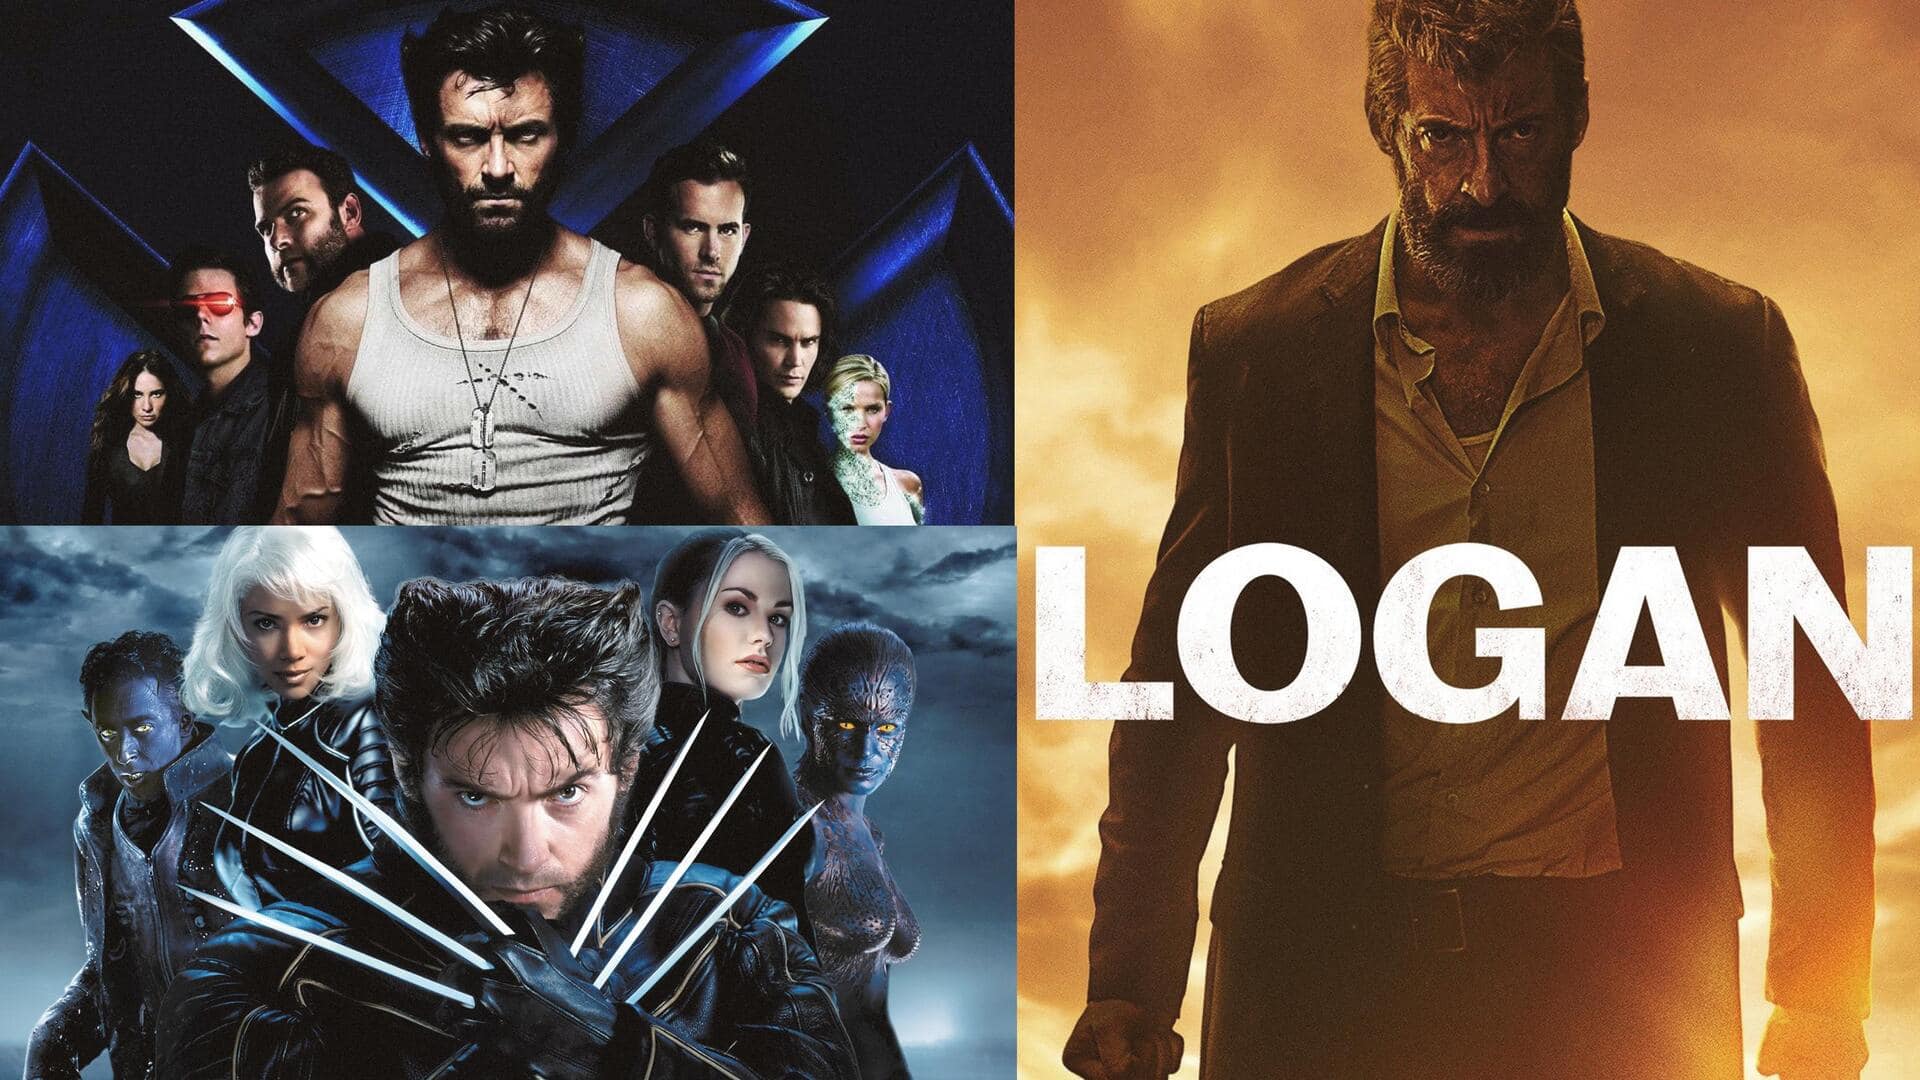 'X-Men' movies must be watched in this chronological order